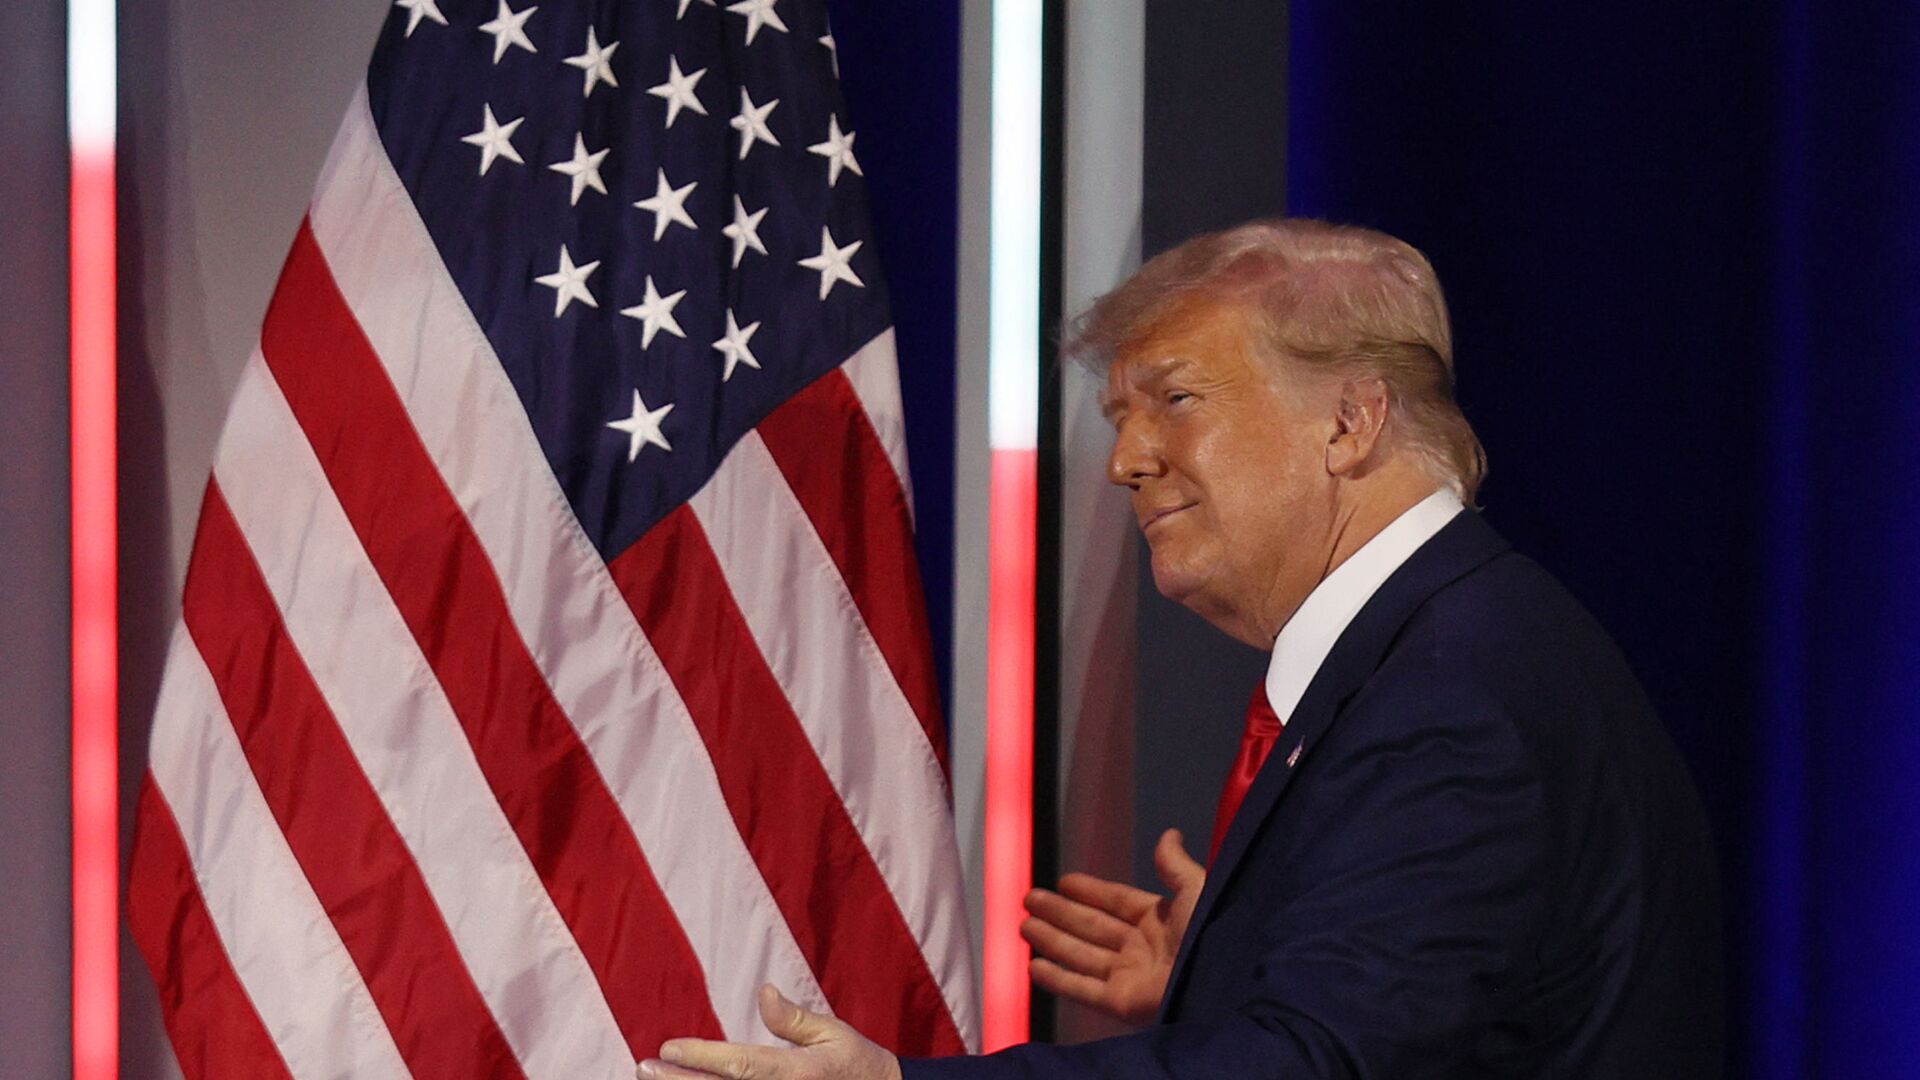 Former President Donald Trump embraces the American flag as he arrives on stage to address the Conservative Political Action Conference held in the Hyatt Regency on 28 February 2021 in Orlando, Florida. Joe Raedle/Getty Images/AFP (Photo by JOE RAEDLE / GETTY IMAGES NORTH AMERICA / Getty Images via AFP) - Sputnik International, 1920, 14.05.2021